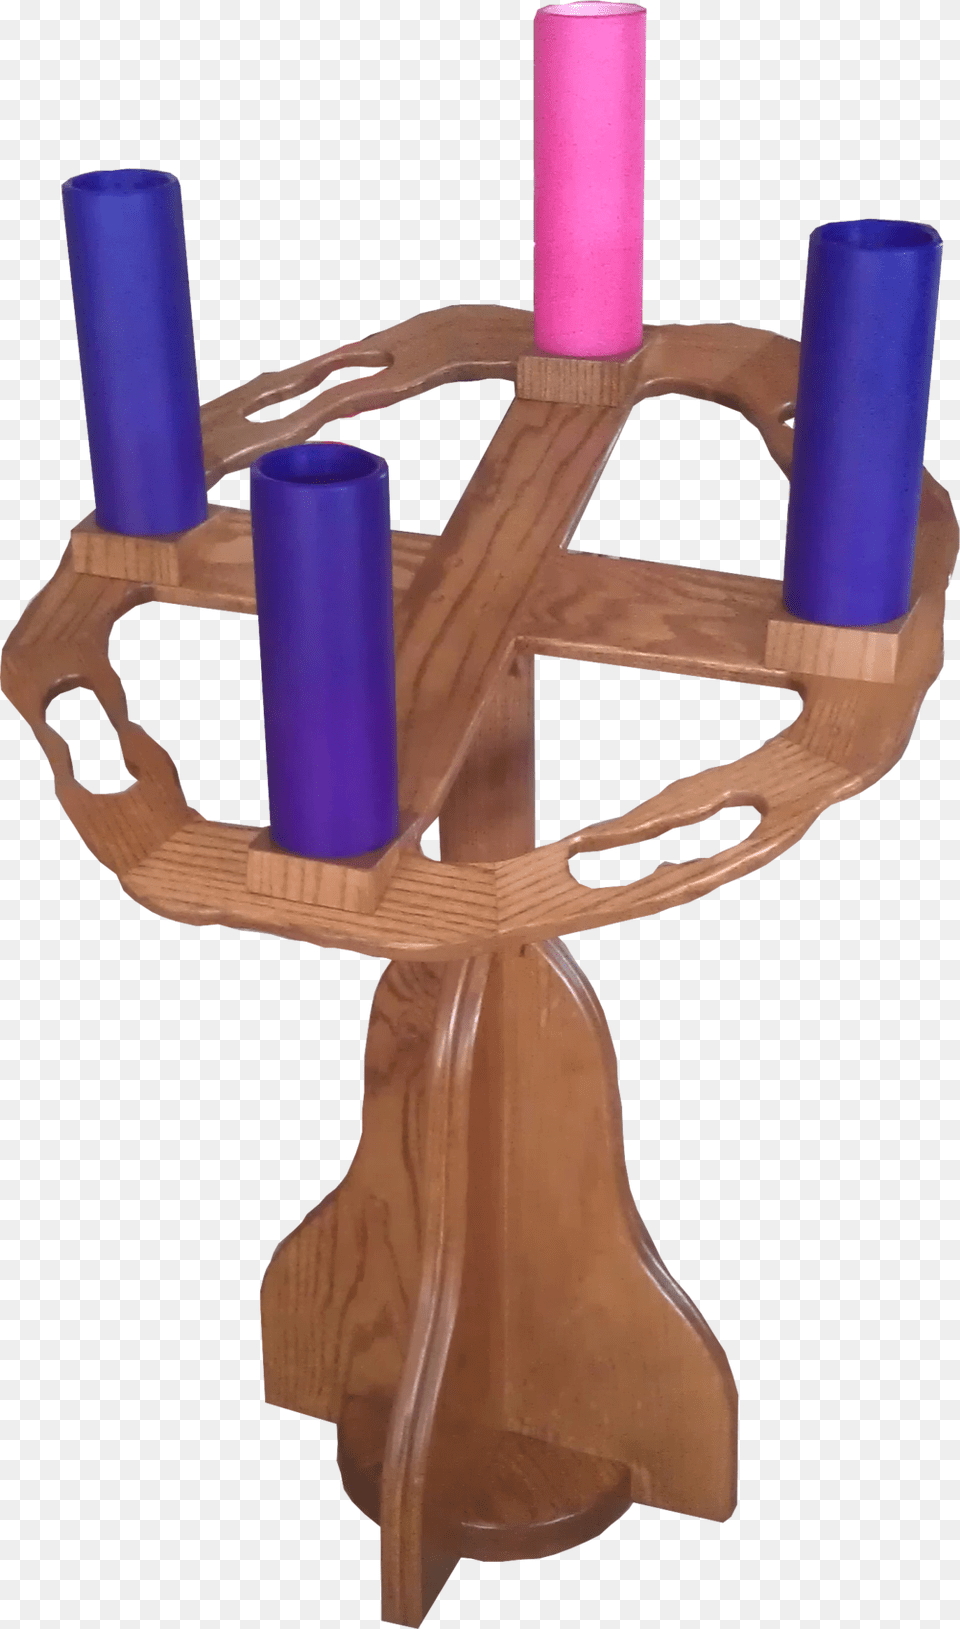 Augustine Advent Wreath Advent Candle, Candlestick, Cosmetics, Lipstick, Dynamite Free Png Download